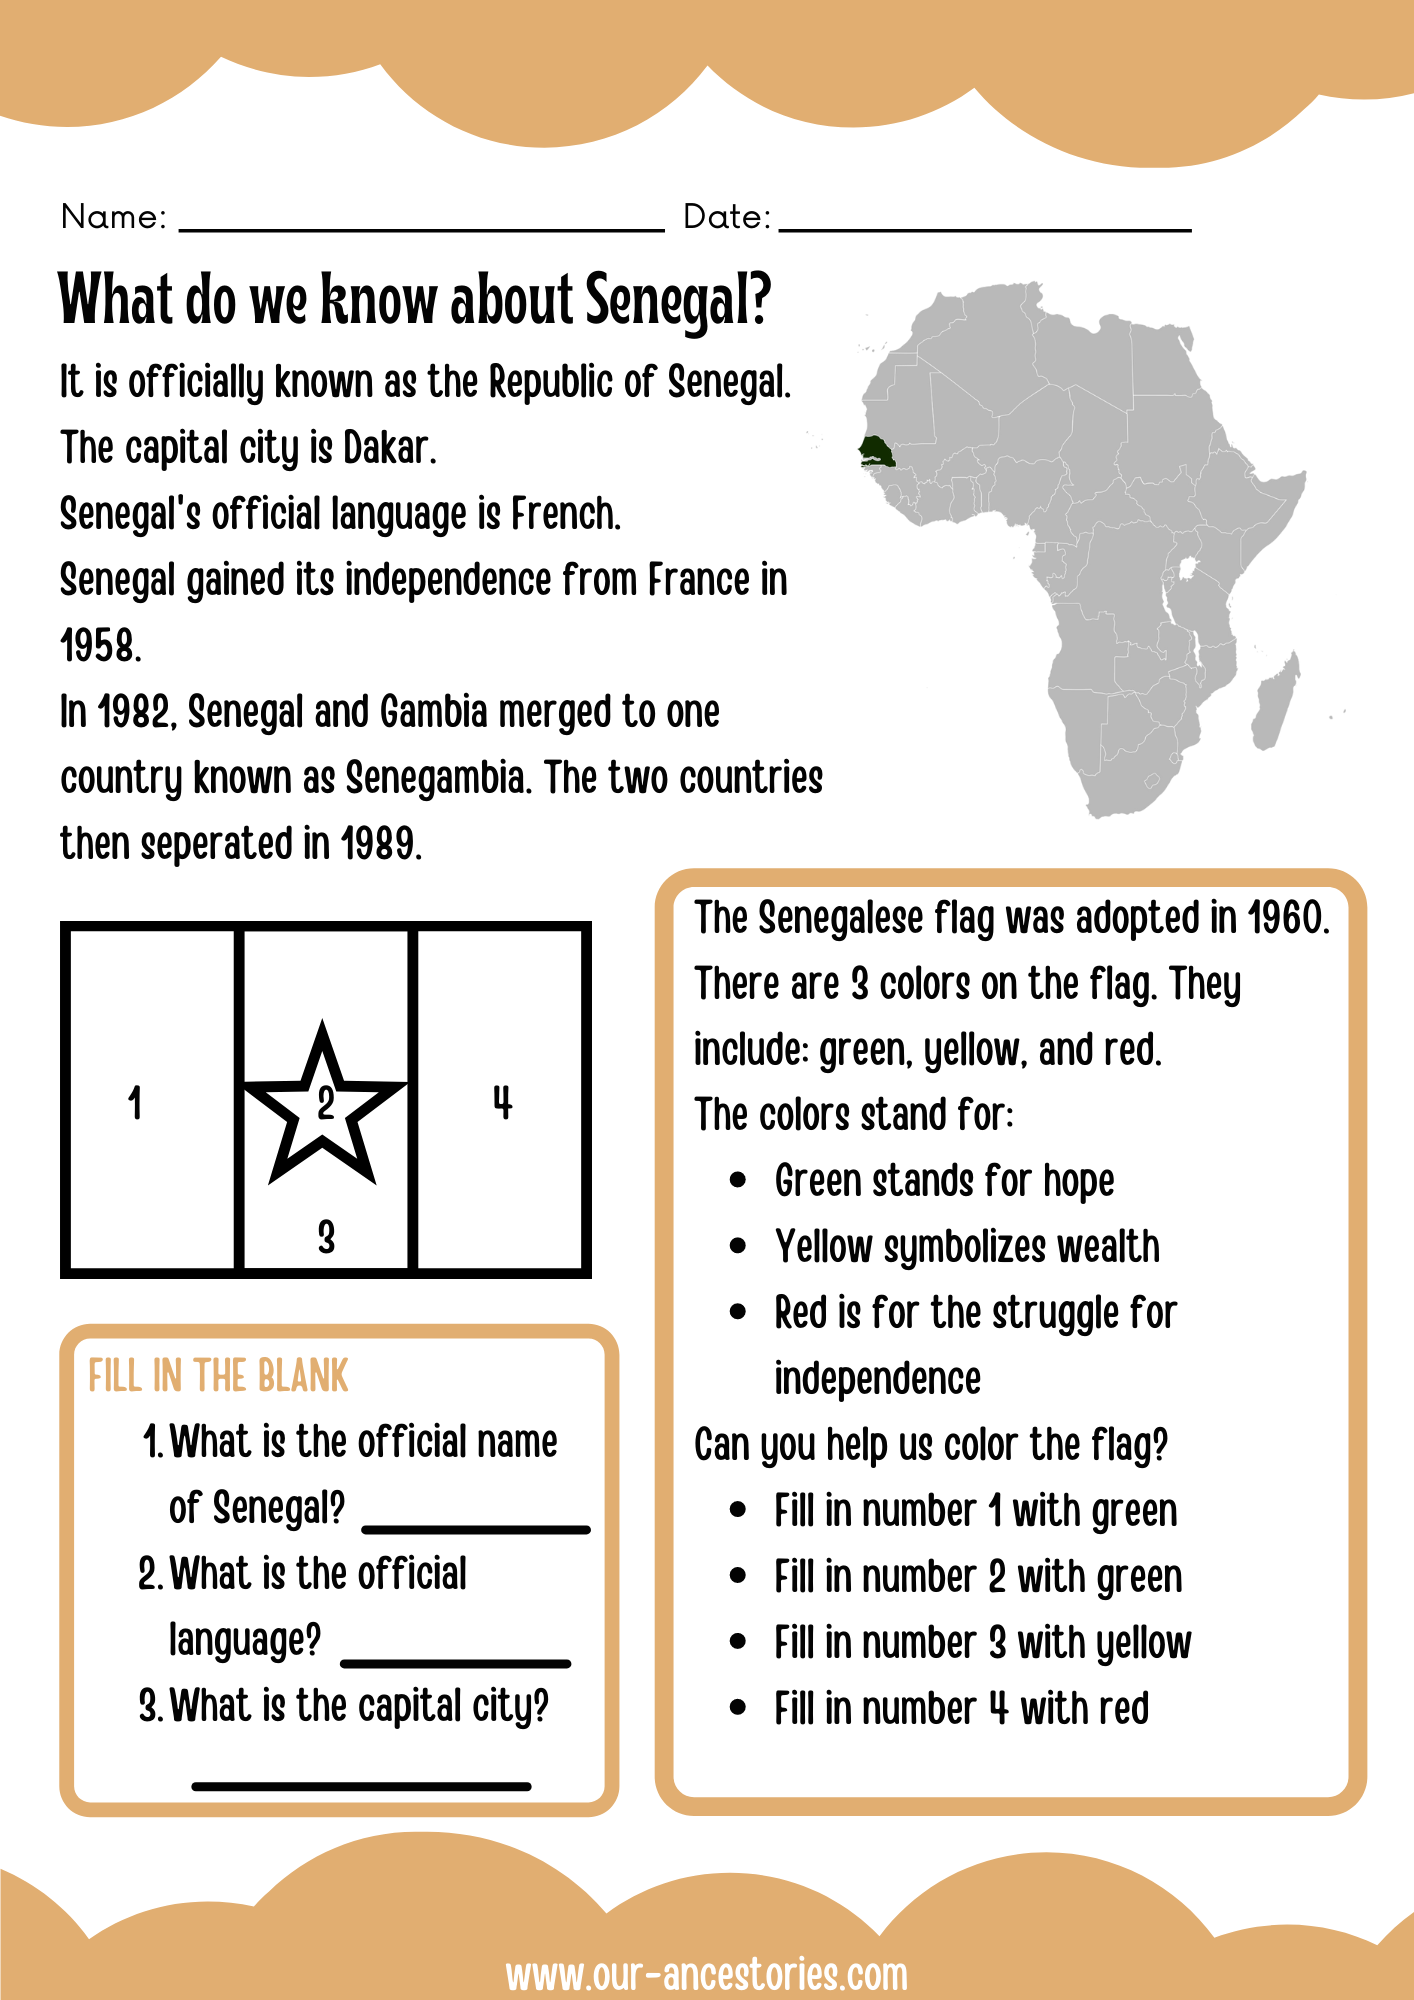 Our Ancestories - Senegal Country Profile - Free Worksheets